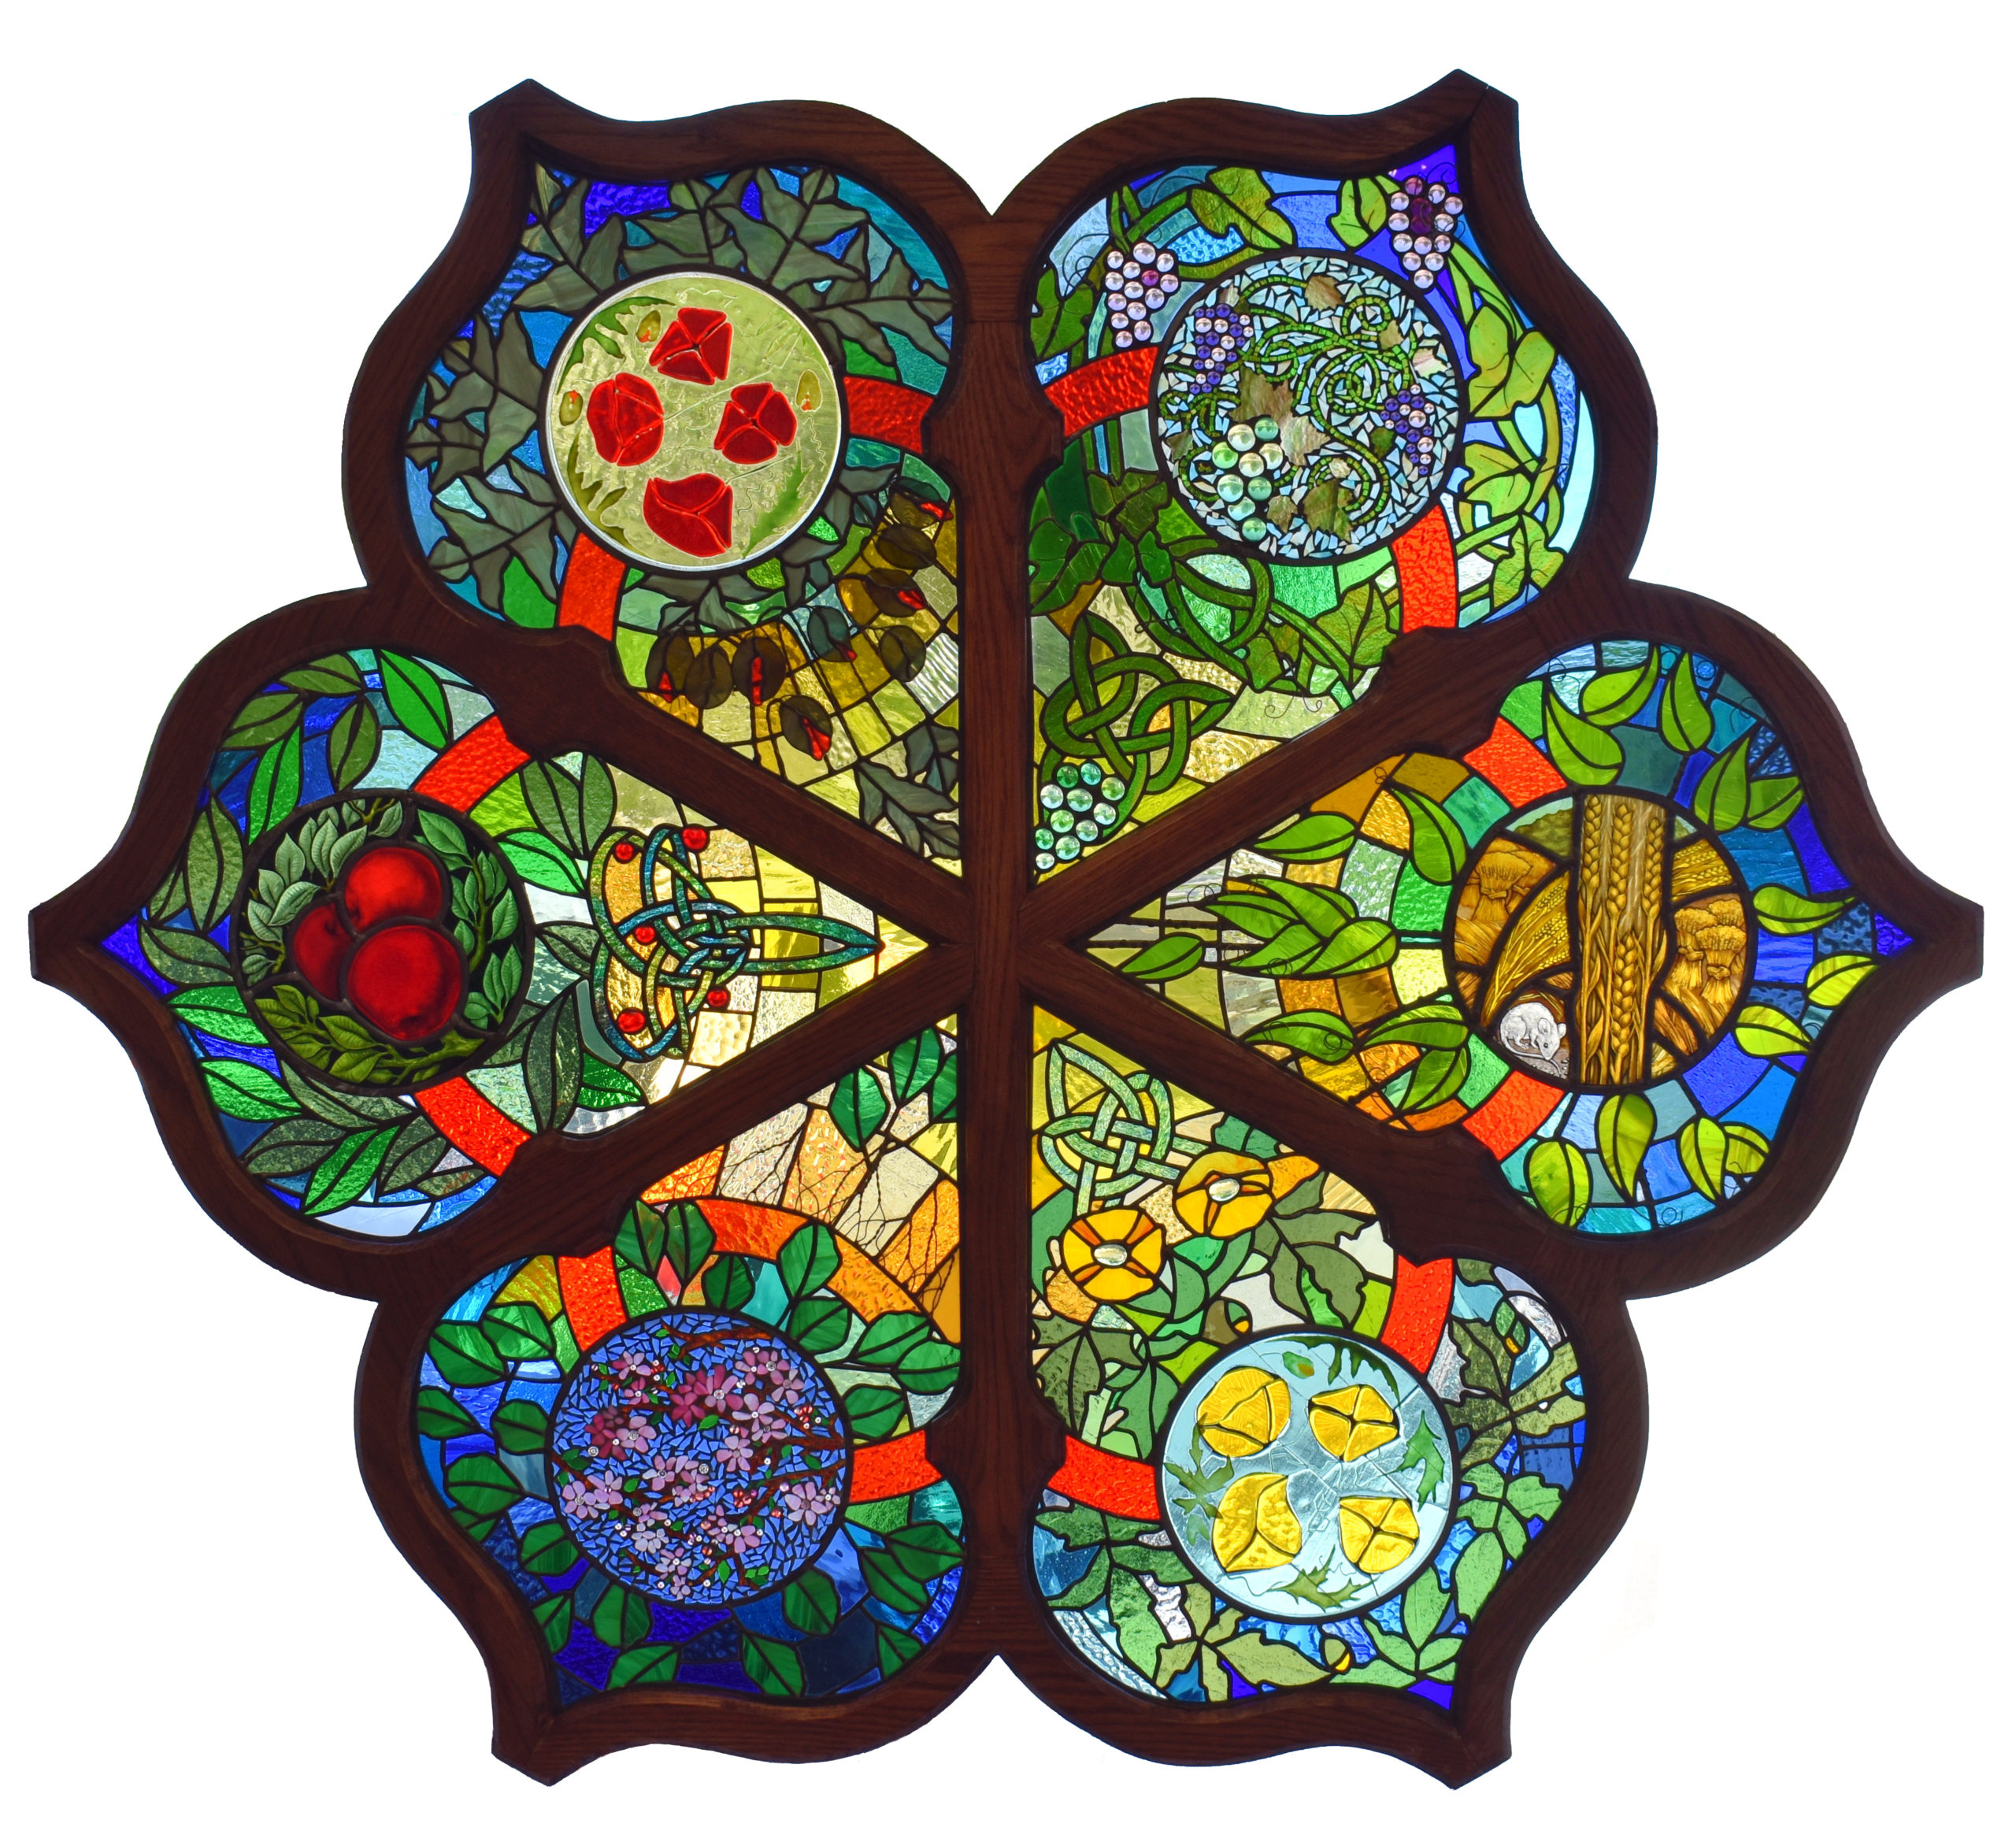 The Rose Window Revisited and Reimagined